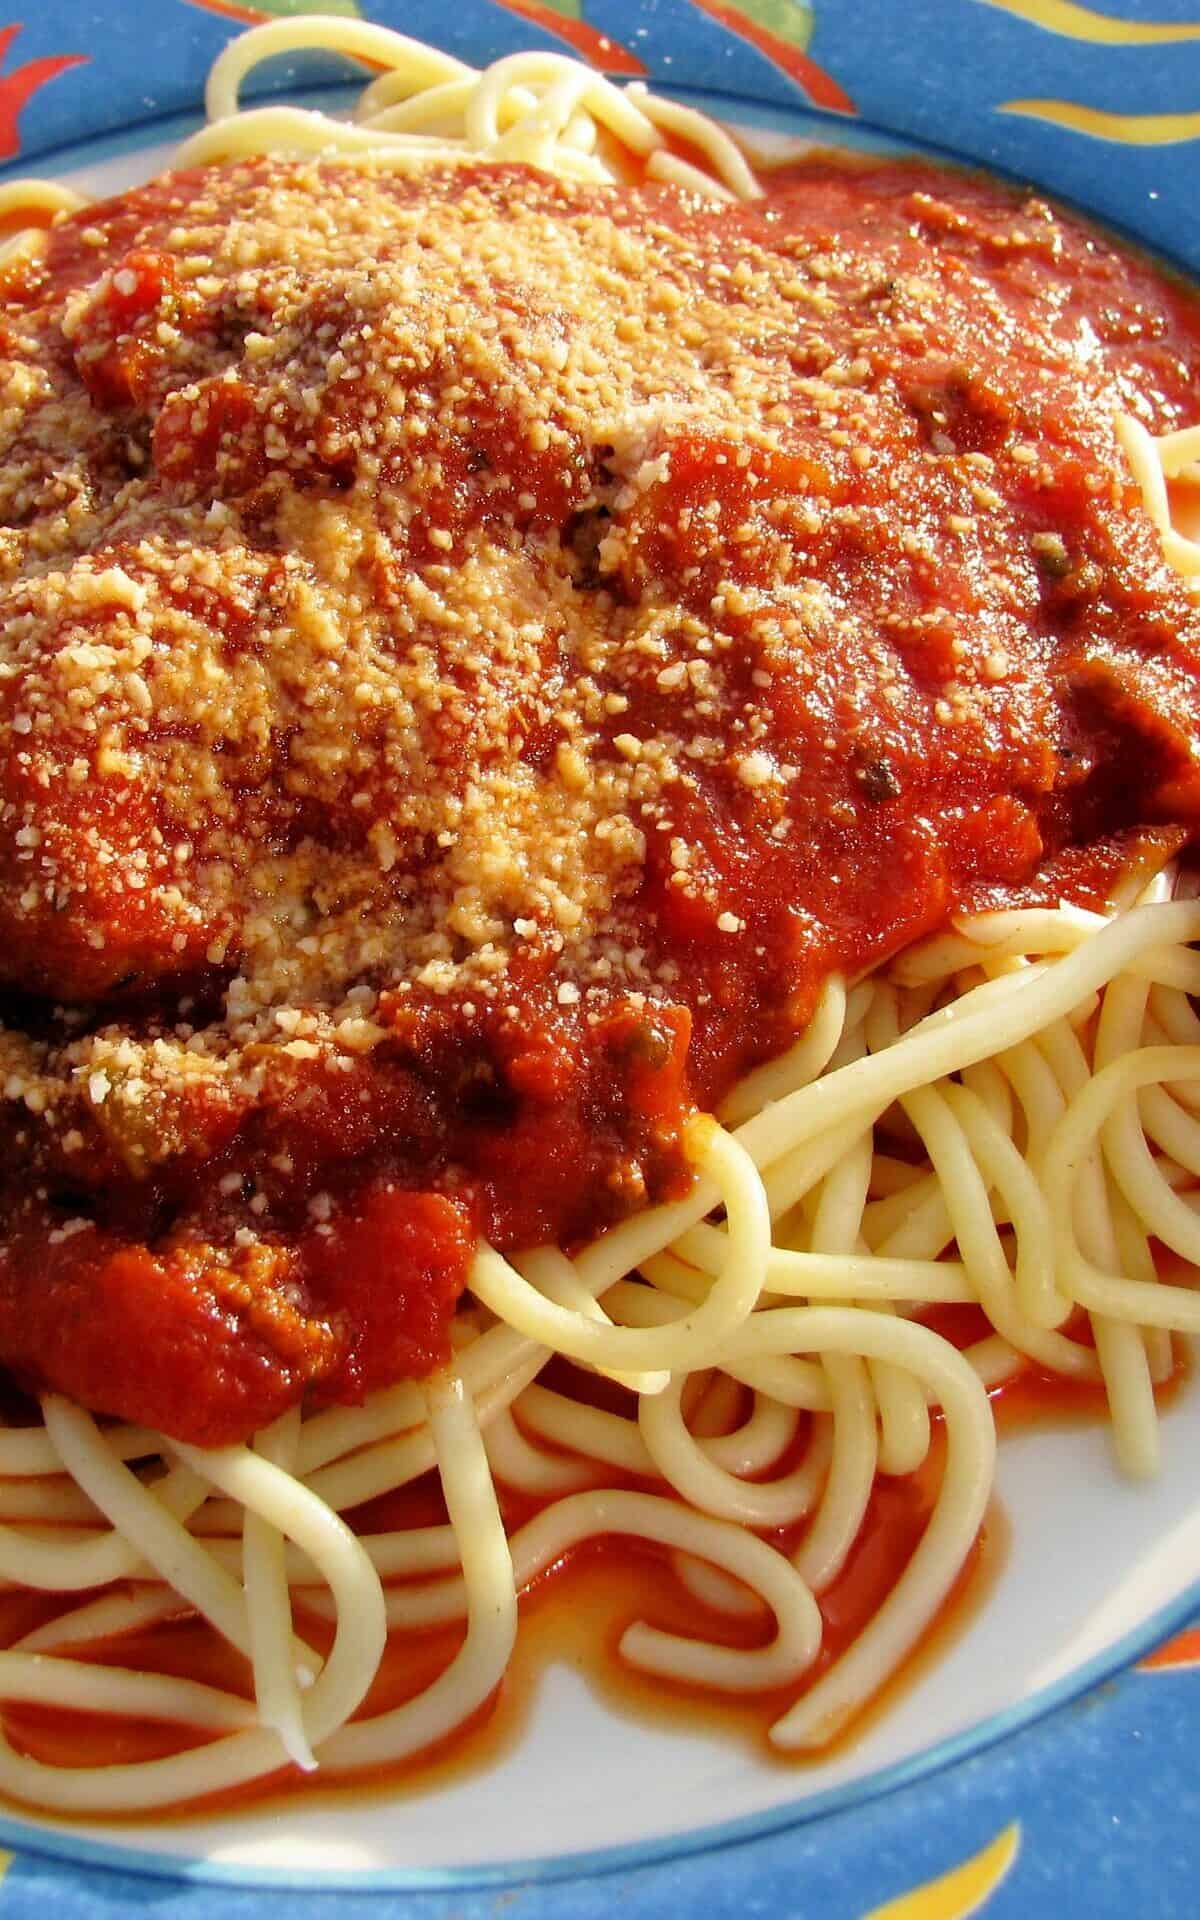  Nothing beats the aroma of homemade spaghetti and meatballs!